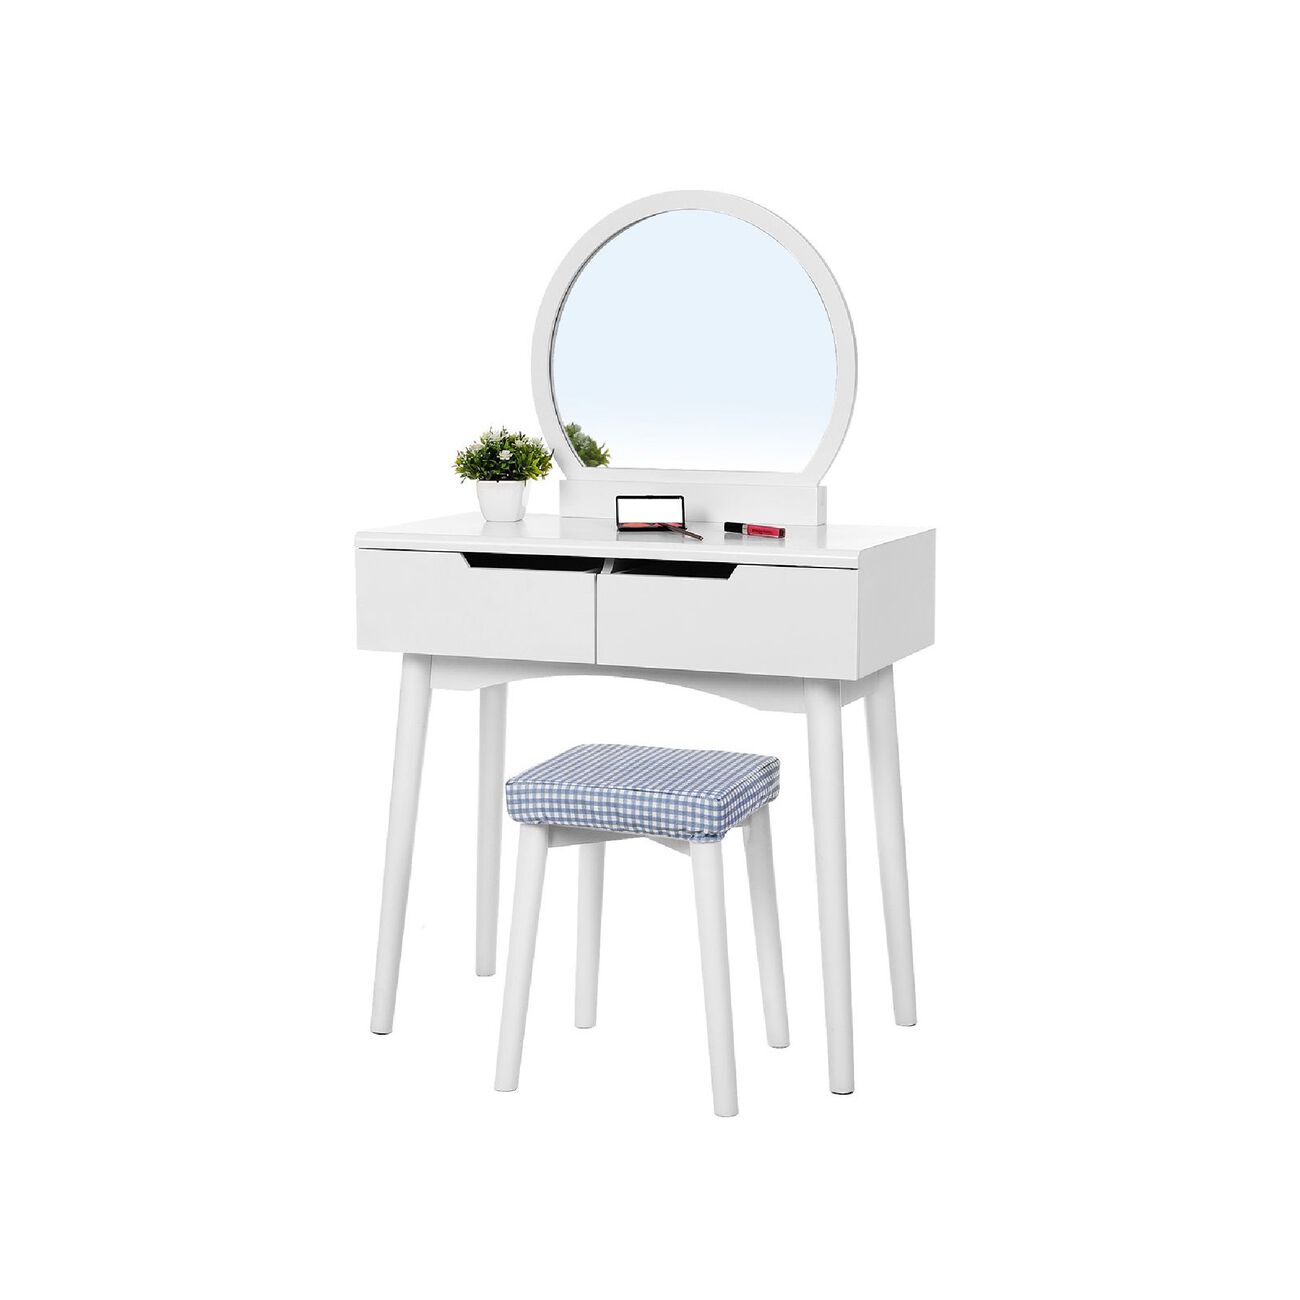 Wooden Frame Vanity Set with Padded Stool and Round Mirror, White